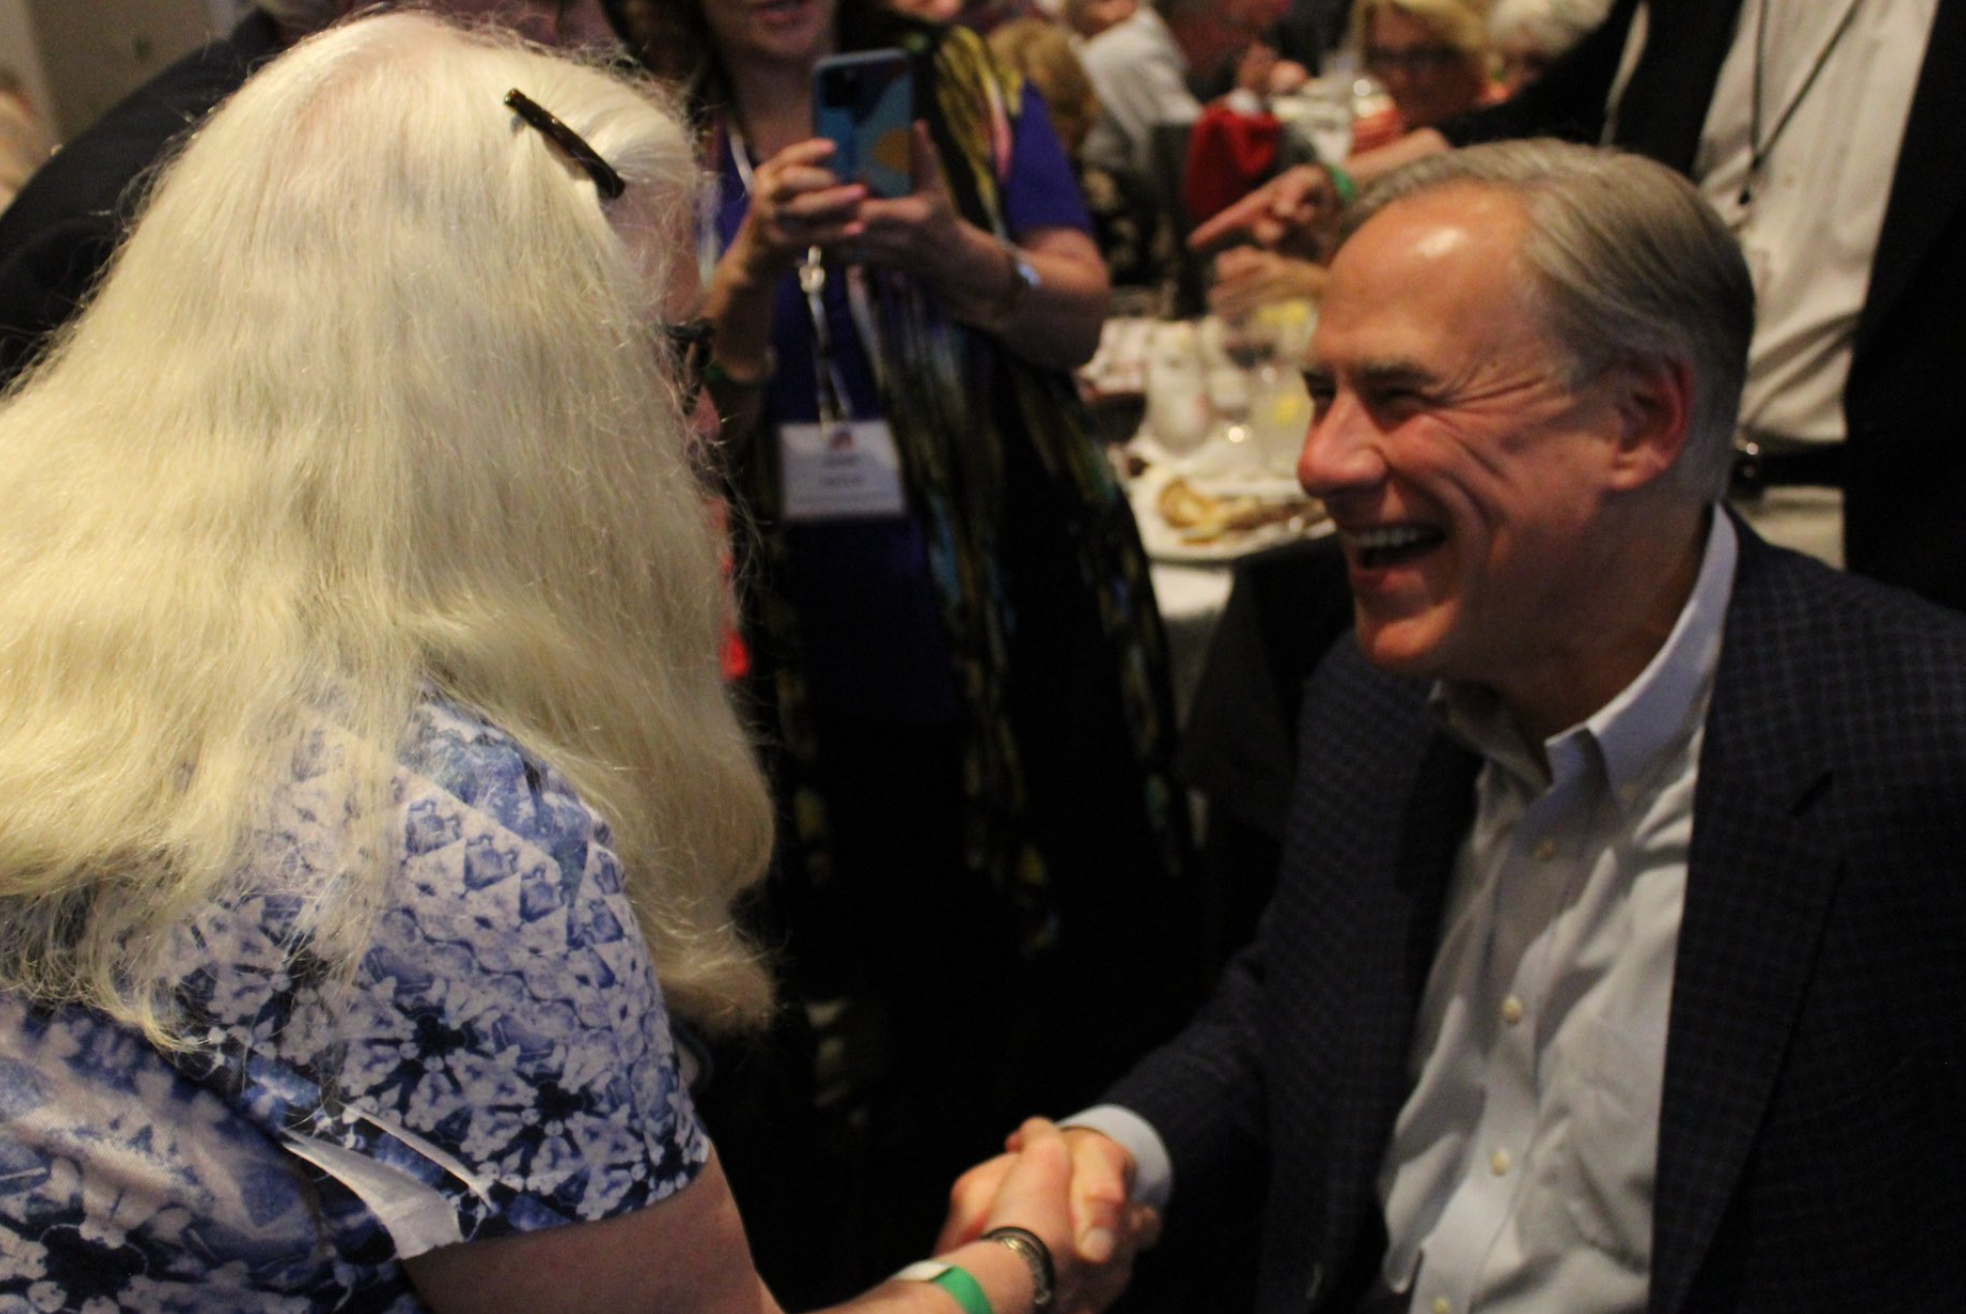 Mr Abbott’s greets wellwishers at a maskless Republican Party event in Collin County on Monday night